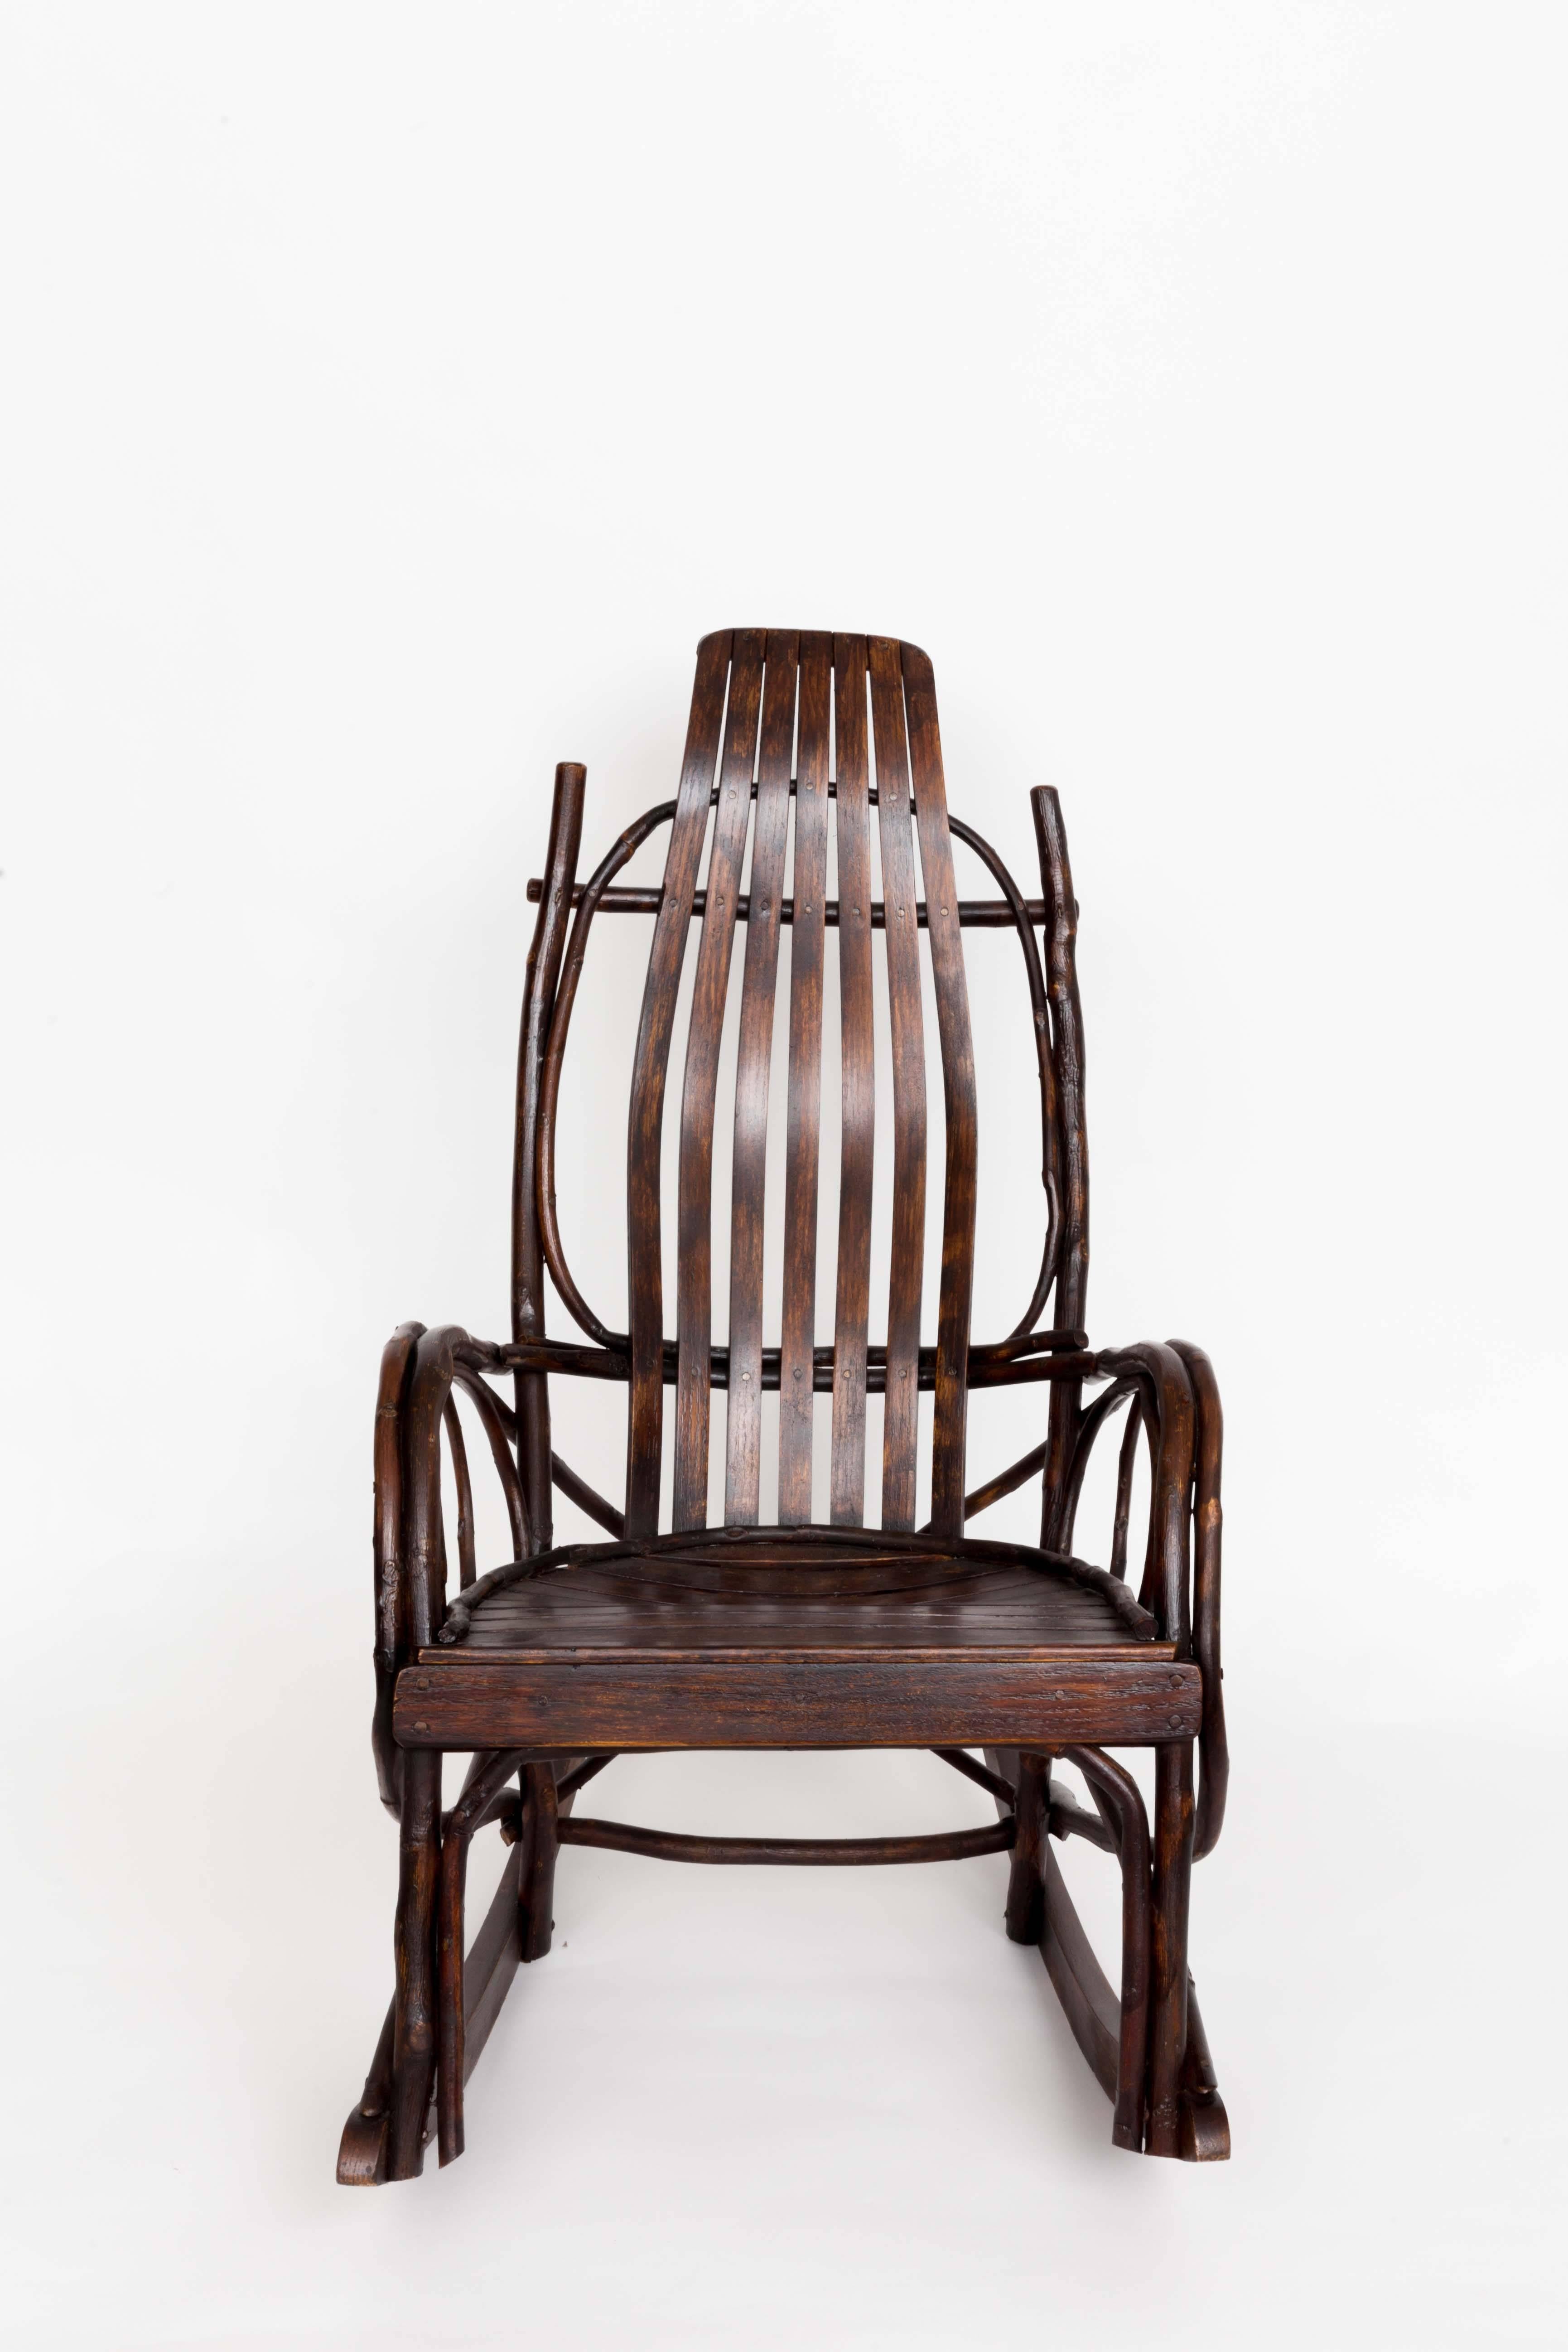 American Early 20th-Century Adirondack Childs Rocker For Sale